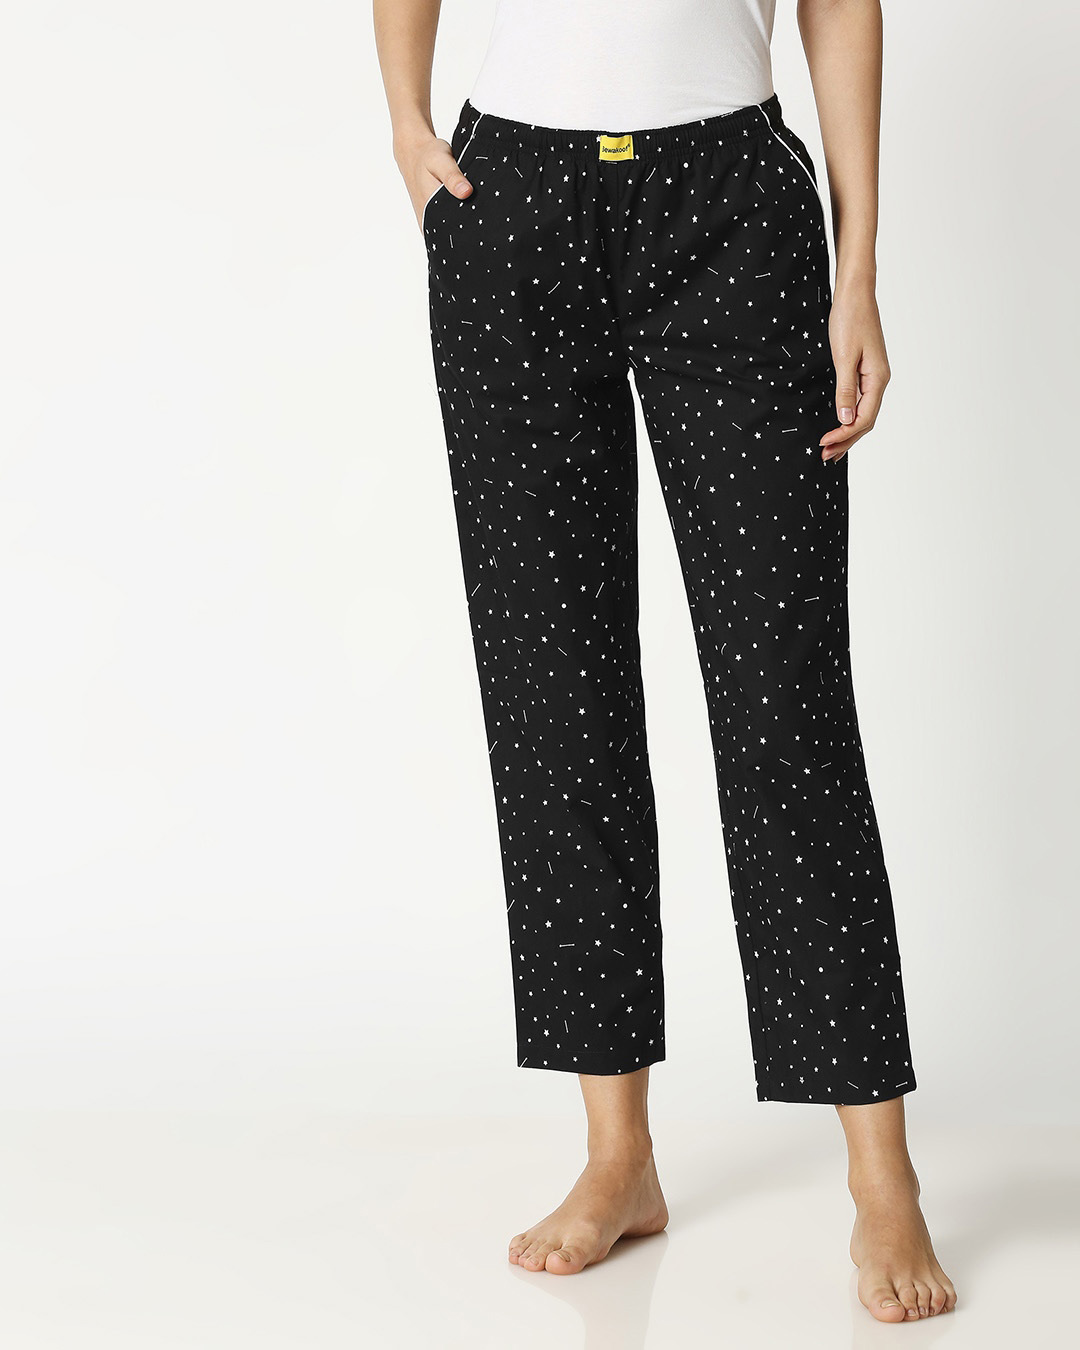 Shop Starry Galaxy All Over Printed Pyjamas-Back